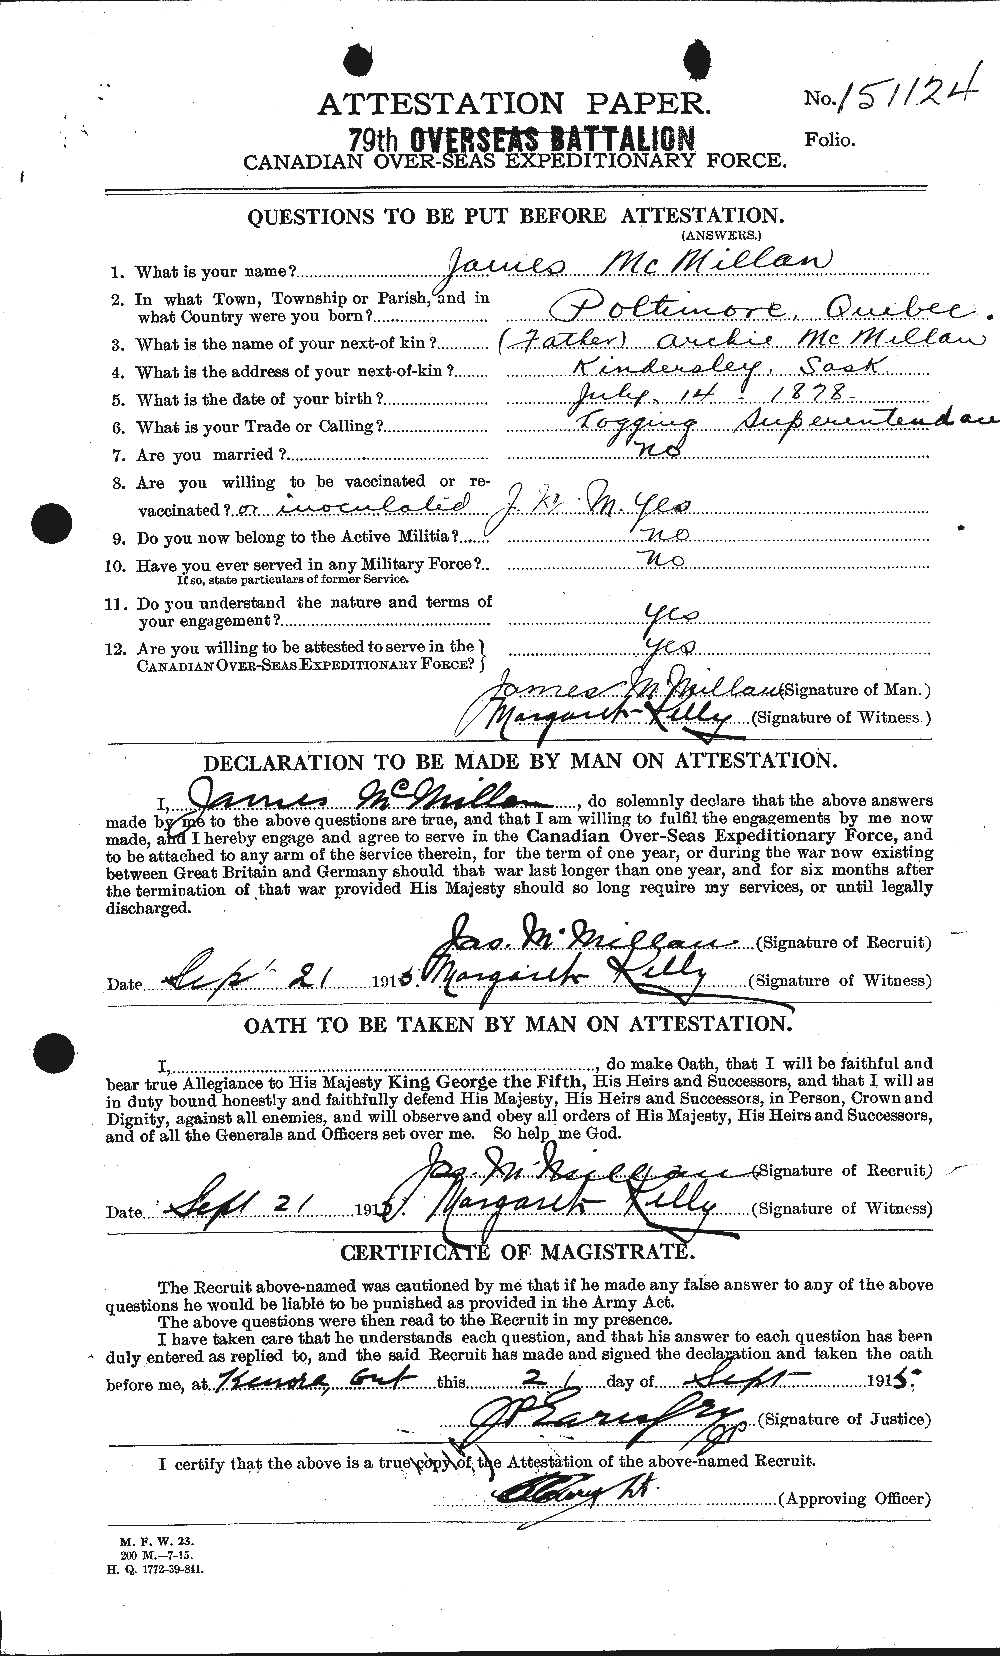 Personnel Records of the First World War - CEF 543909a